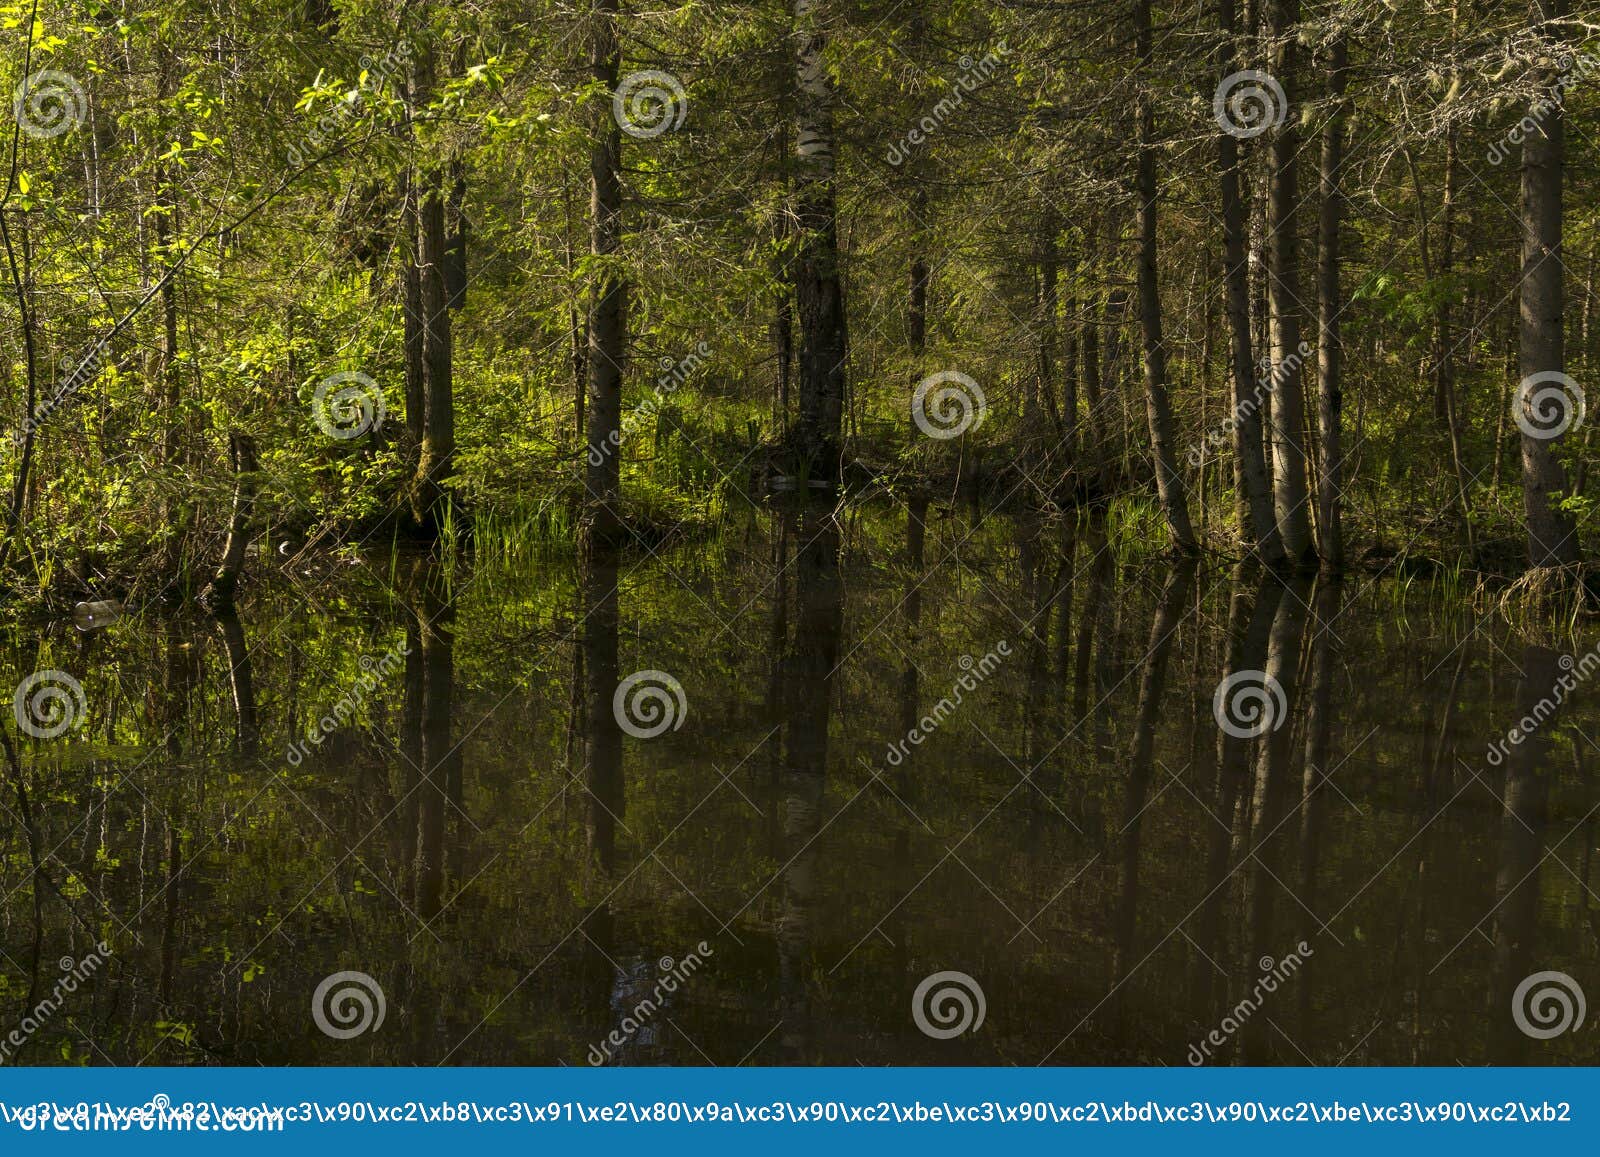 small forest lake in the shade of trees